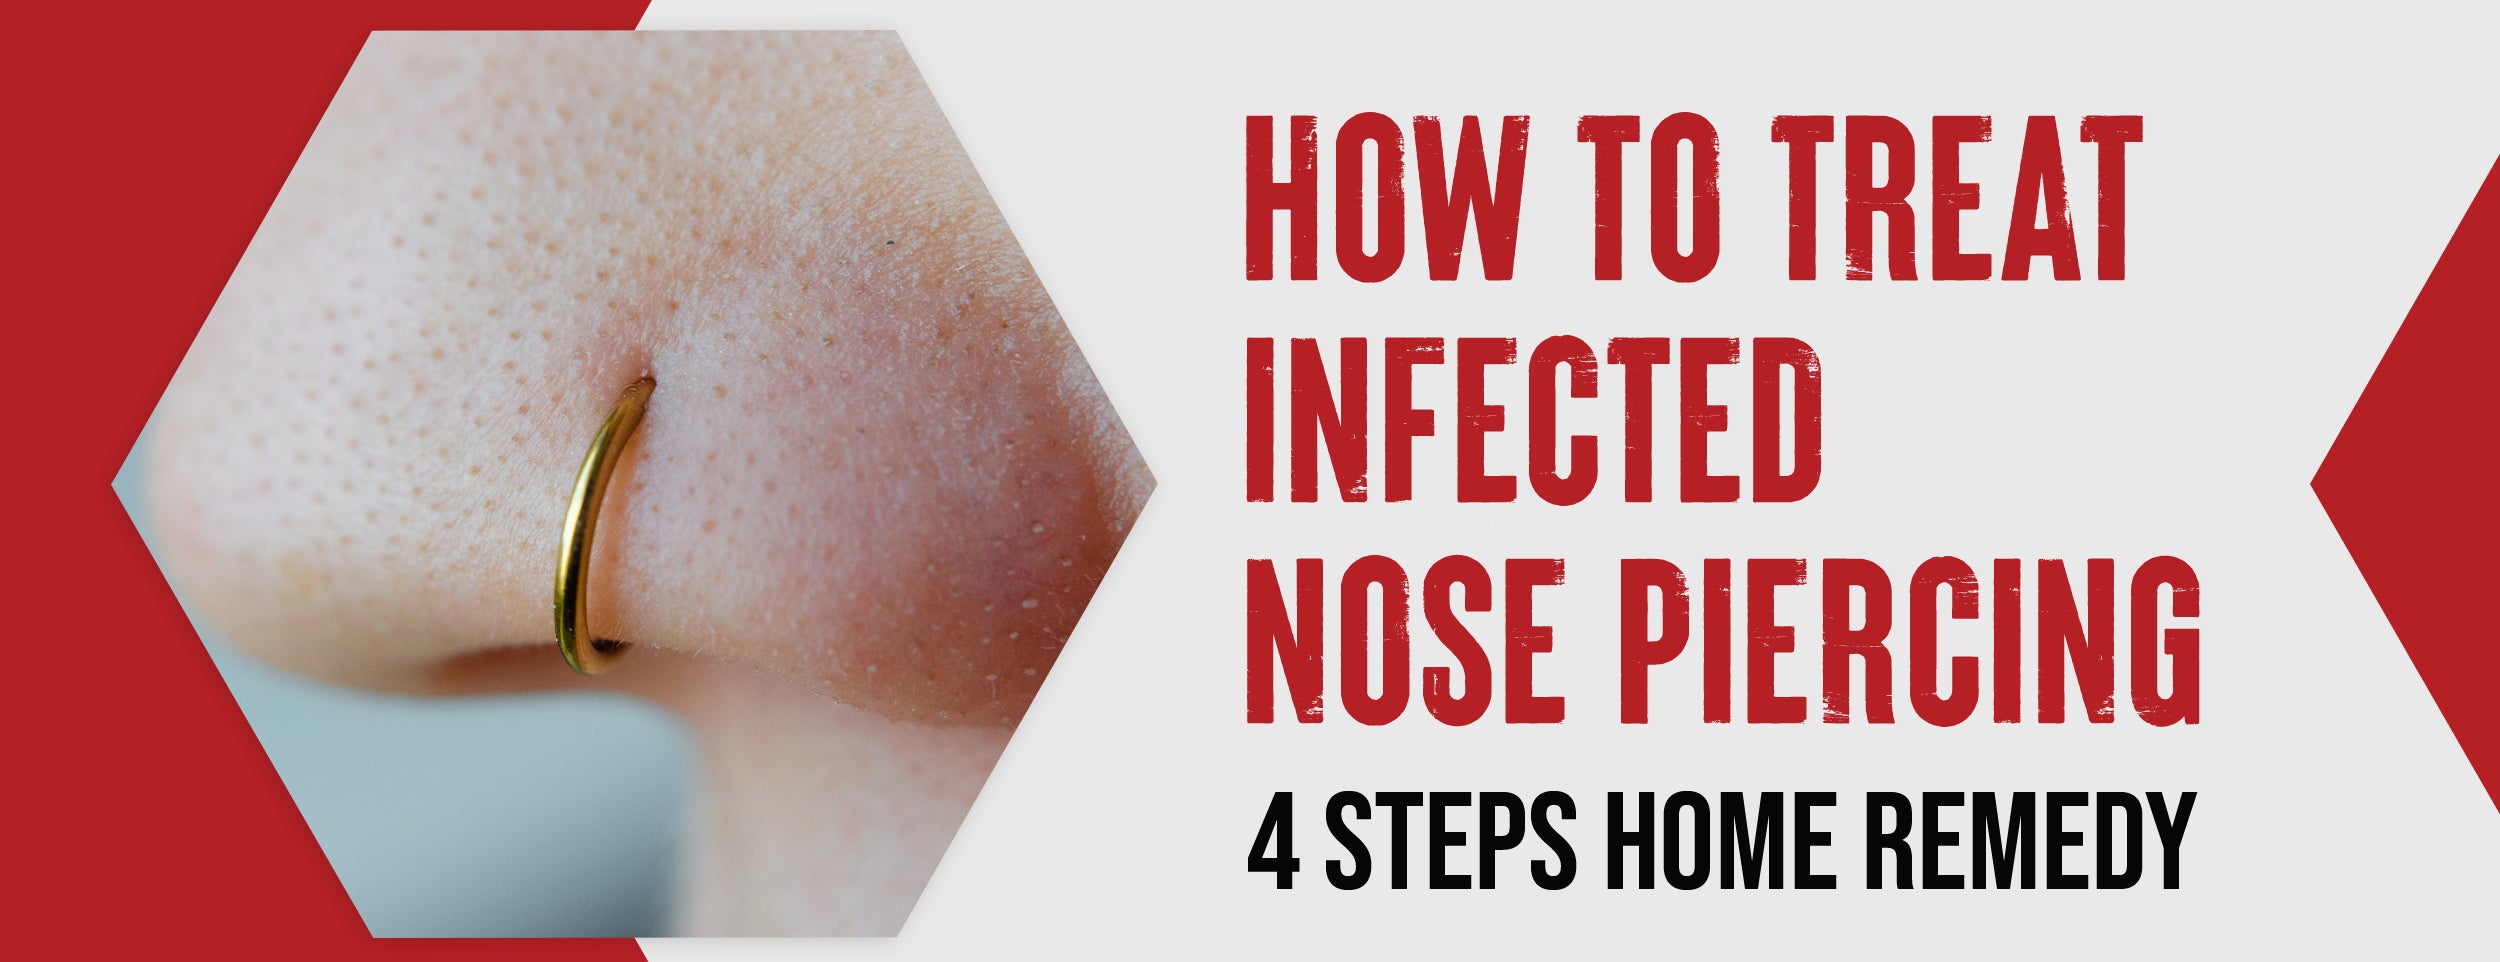 Home Remedies & Prevention Tips for Infected Nose Piercing